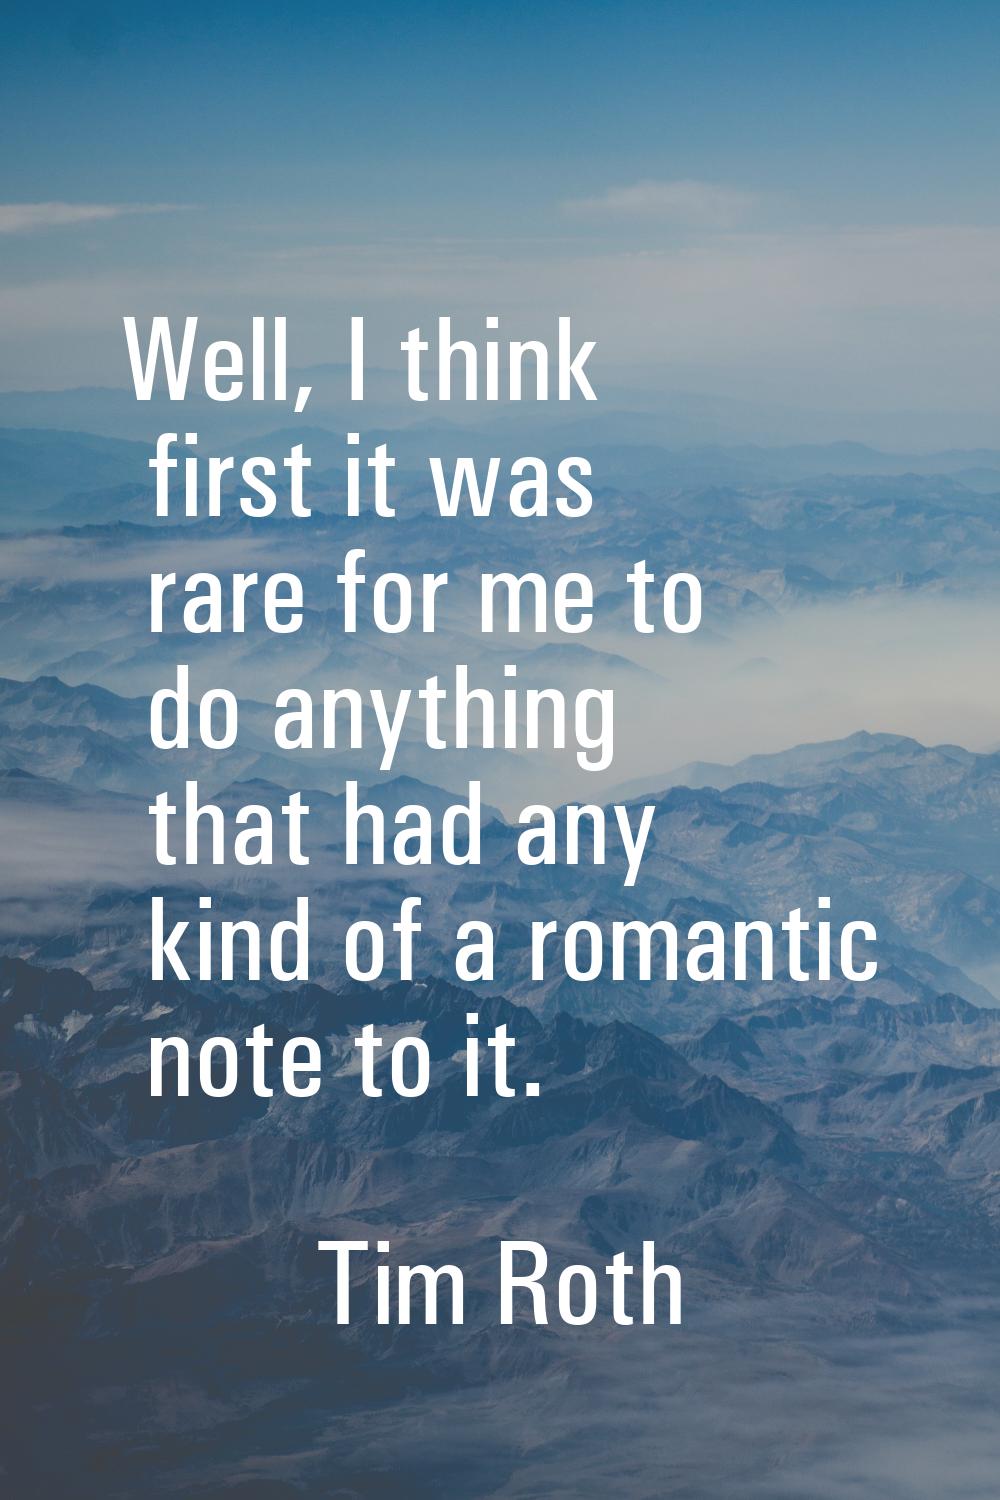 Well, I think first it was rare for me to do anything that had any kind of a romantic note to it.